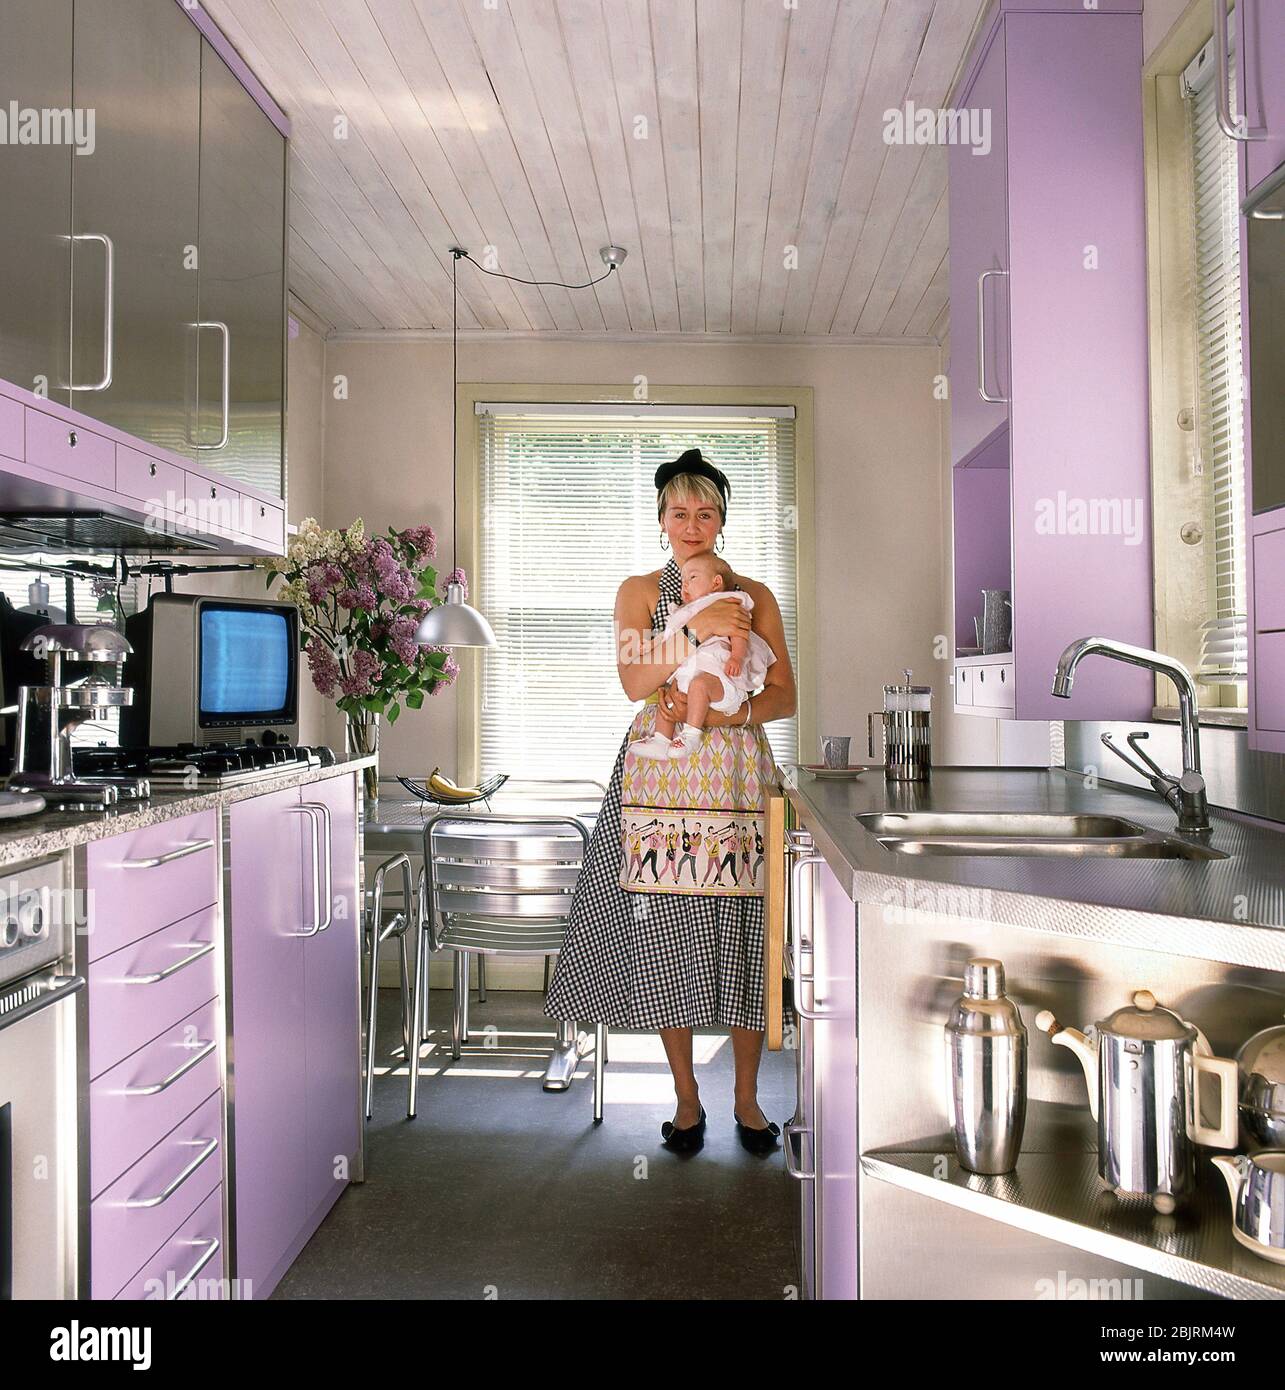 Woman with baby in a retro kitchen Stock Photo